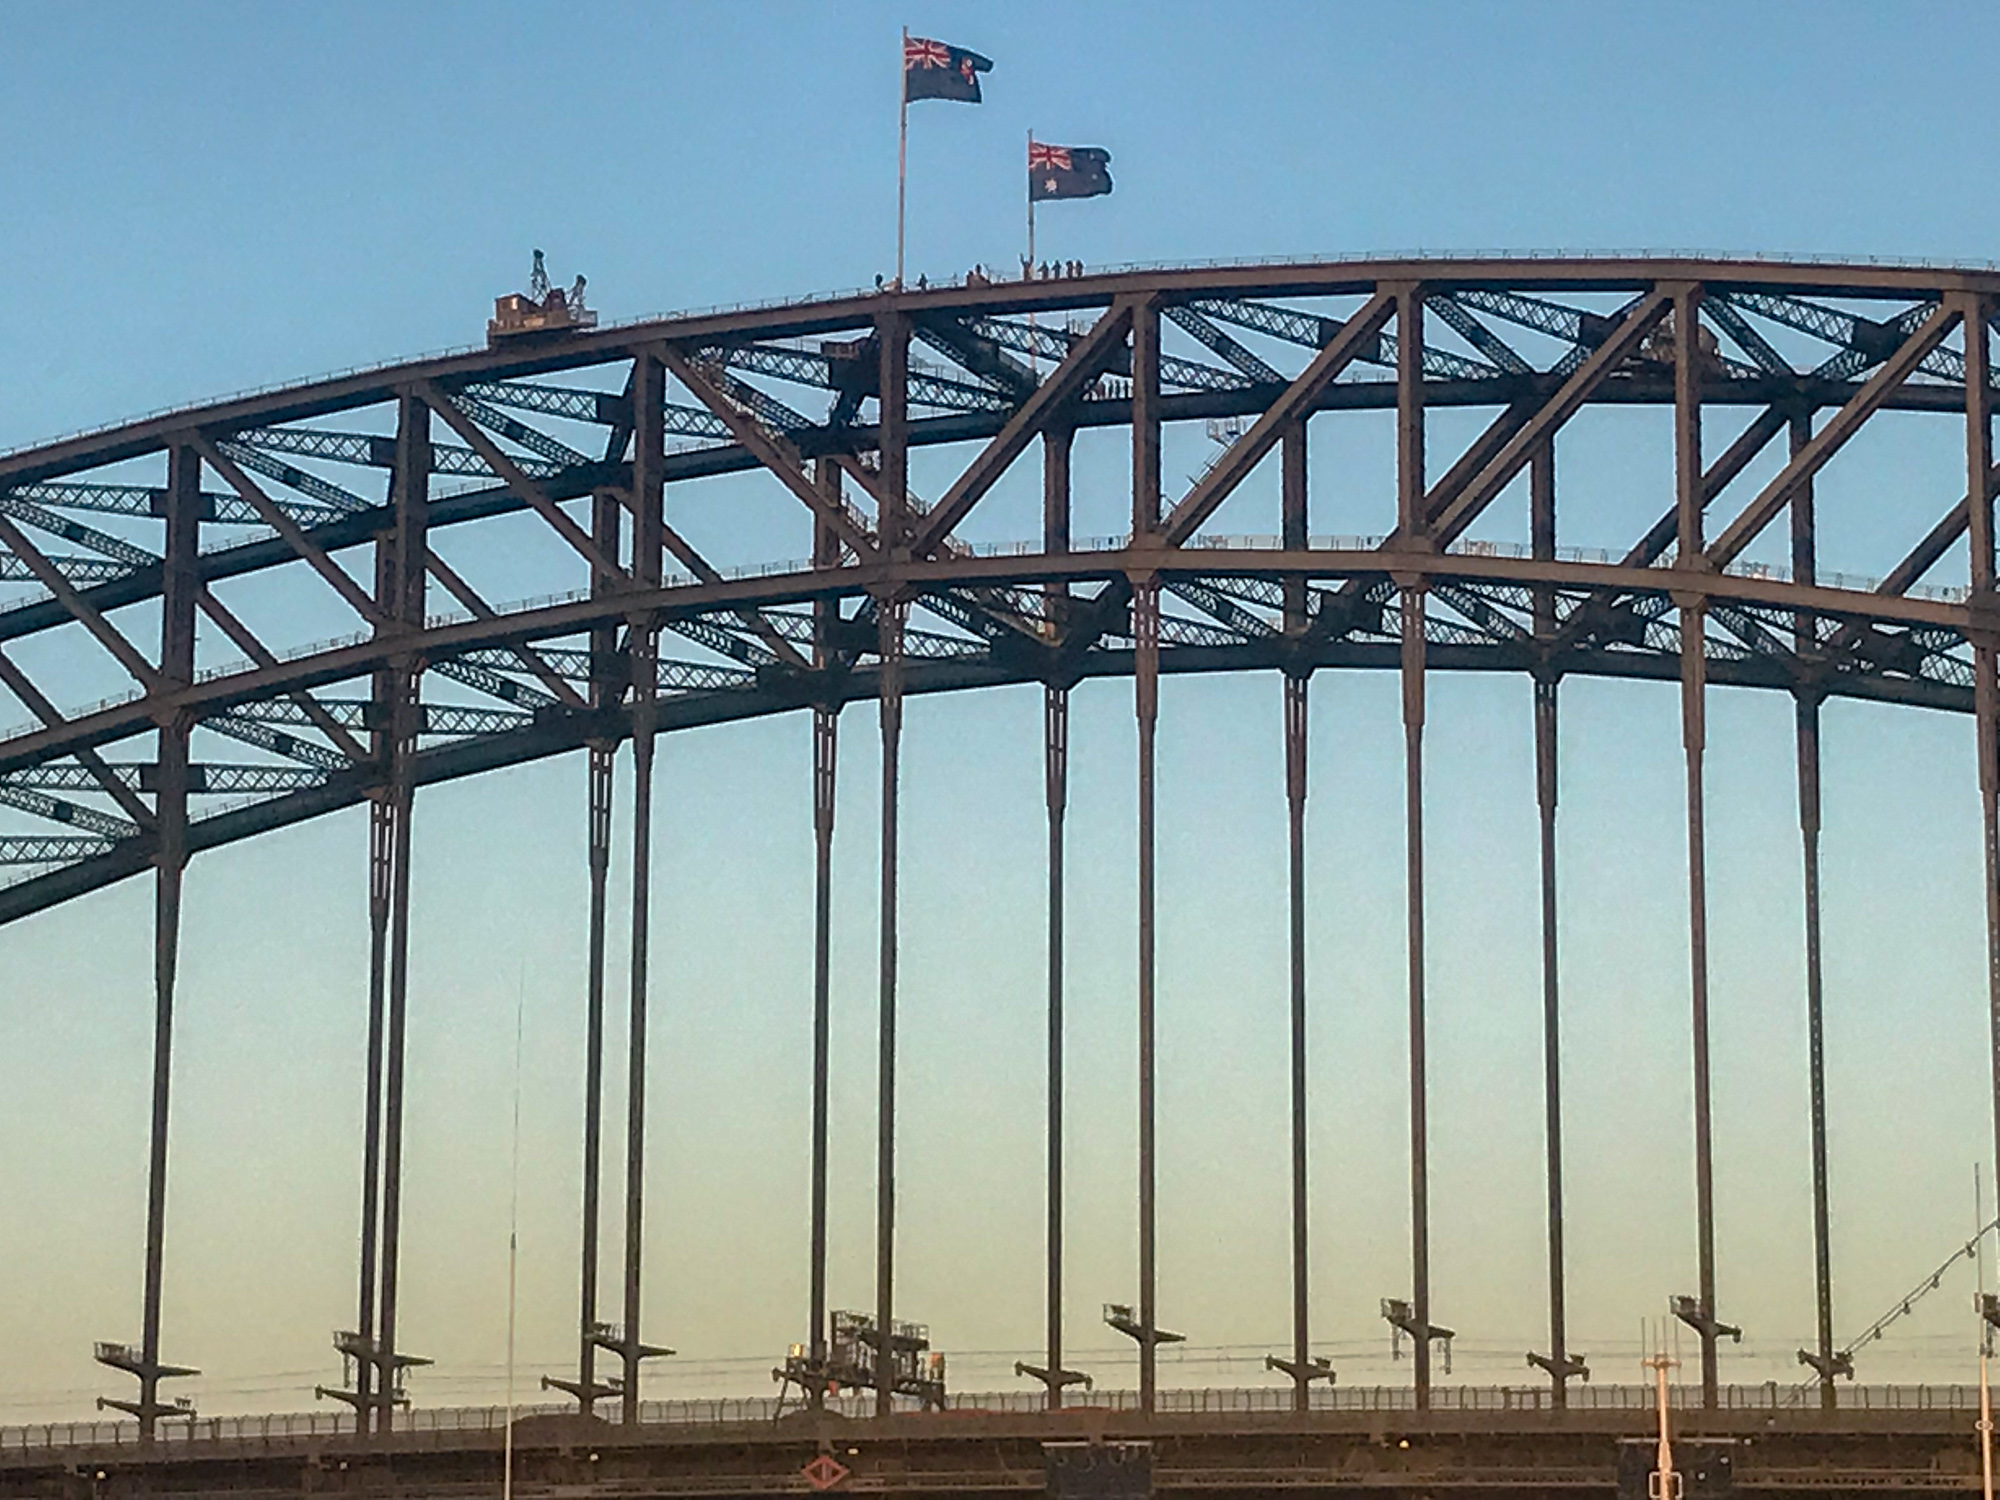 Those little dots on top of the Harbor Bridge are people watching us prepare to pass under the bridge.